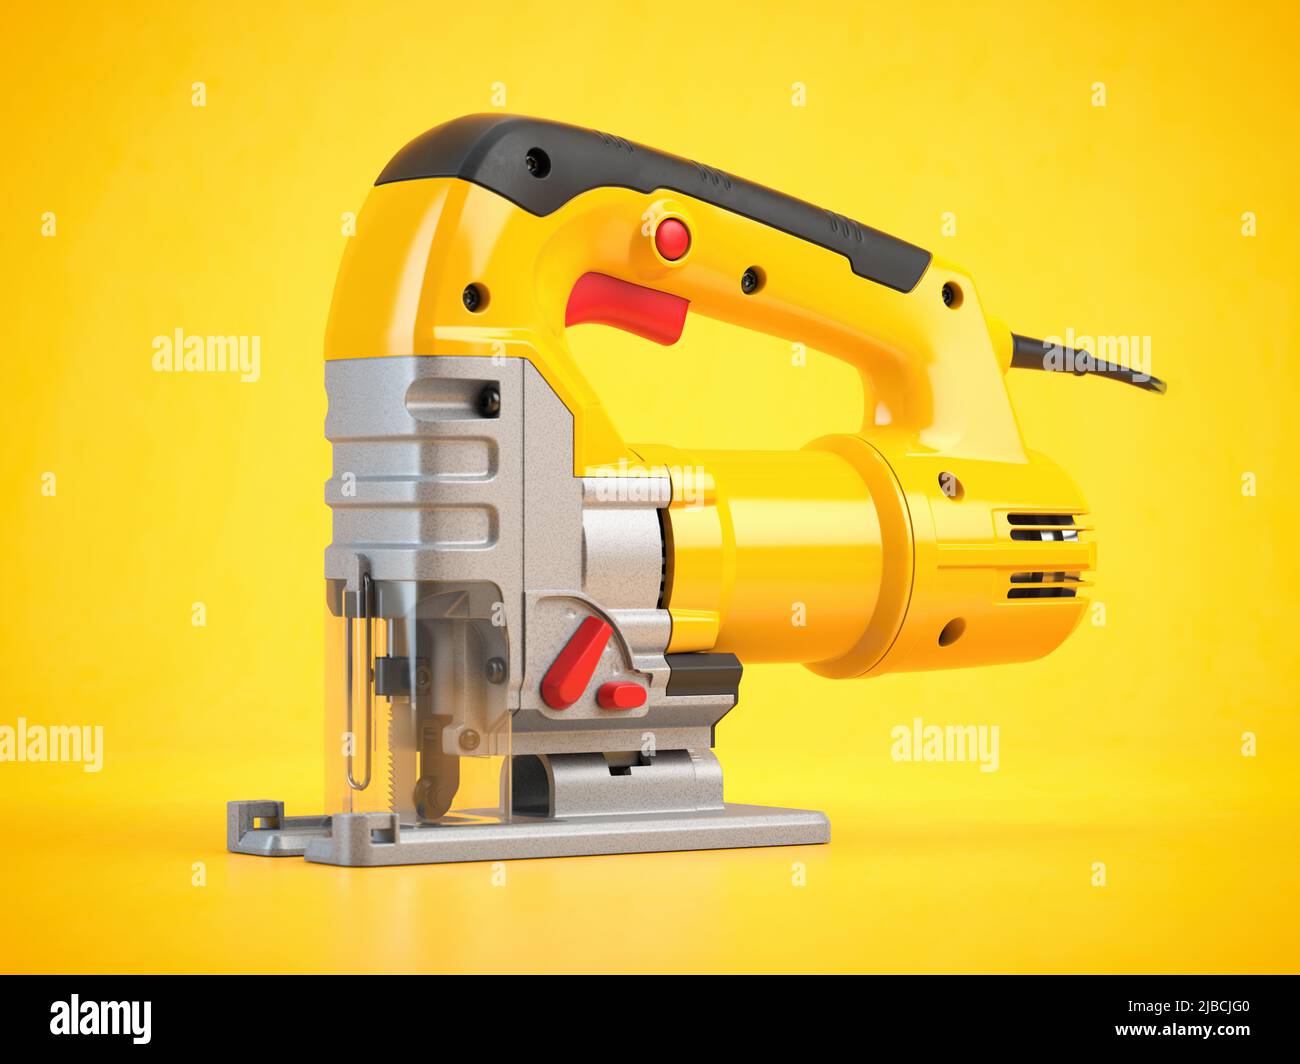 Yellow electric jigsaw on yellow background. Electric tool for carpenter. 3d illustration Stock Photo